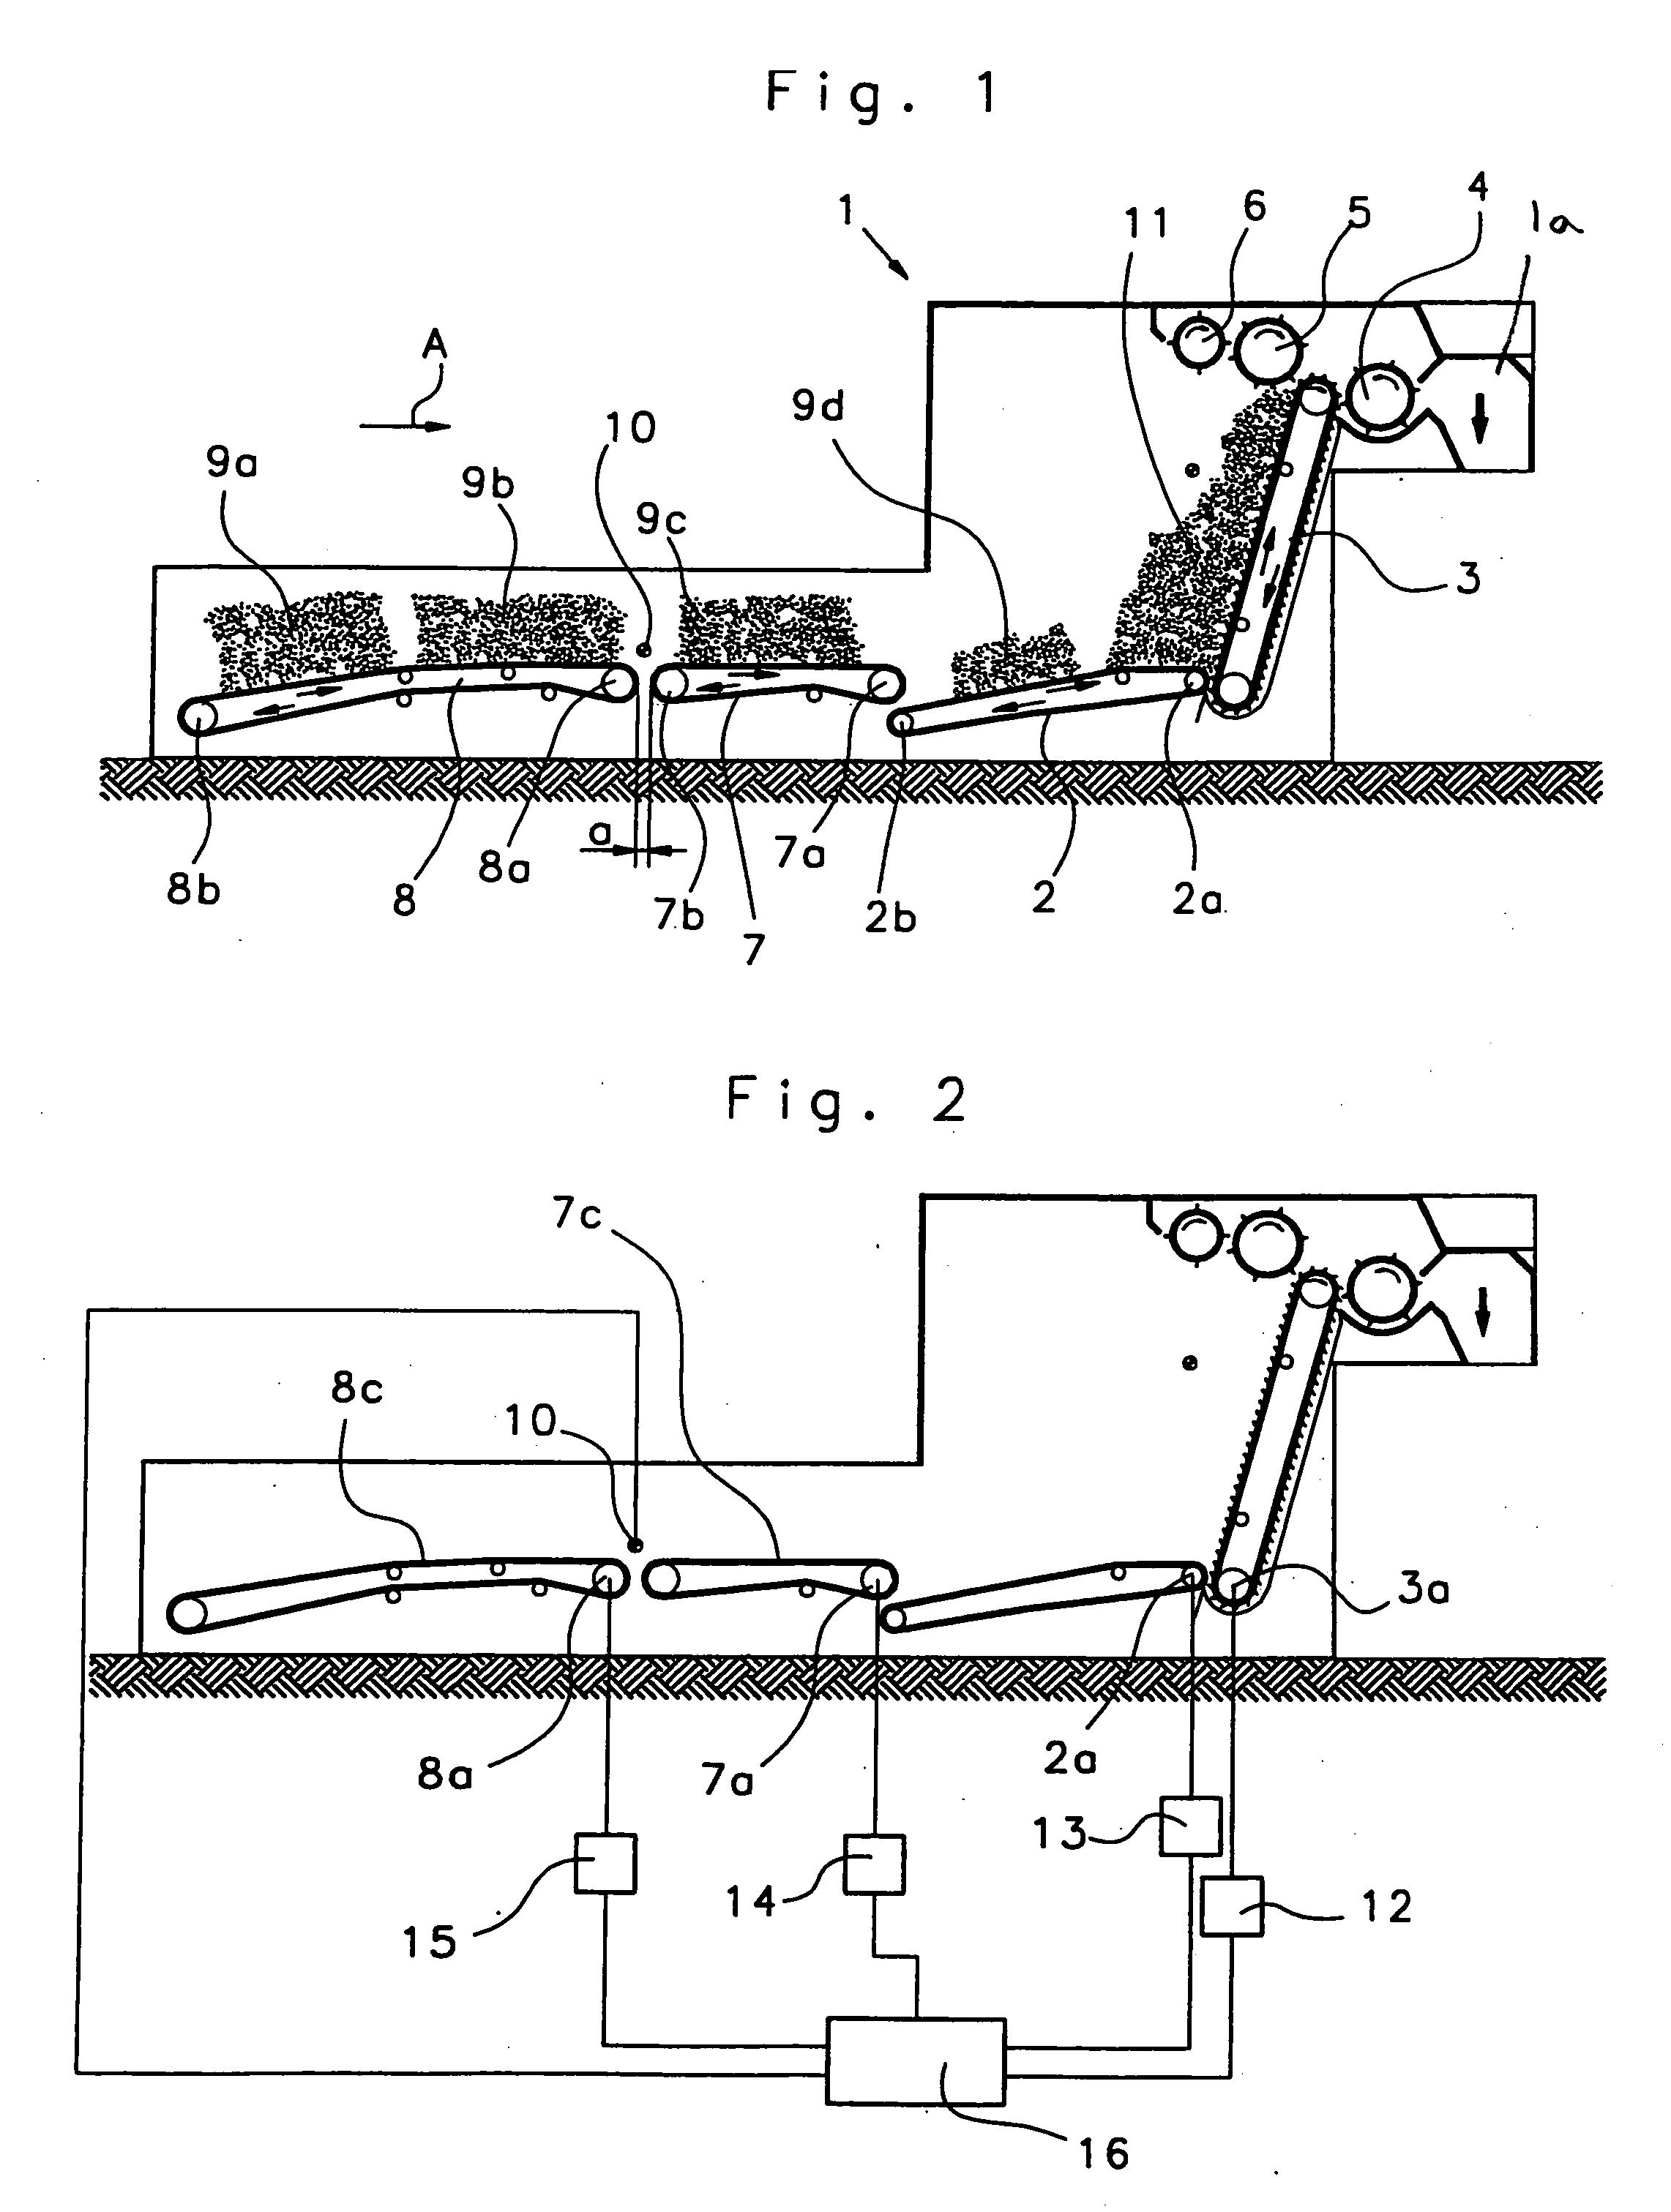 Apparatus for operating a feed device for fiber material, for example, a hopper feeder